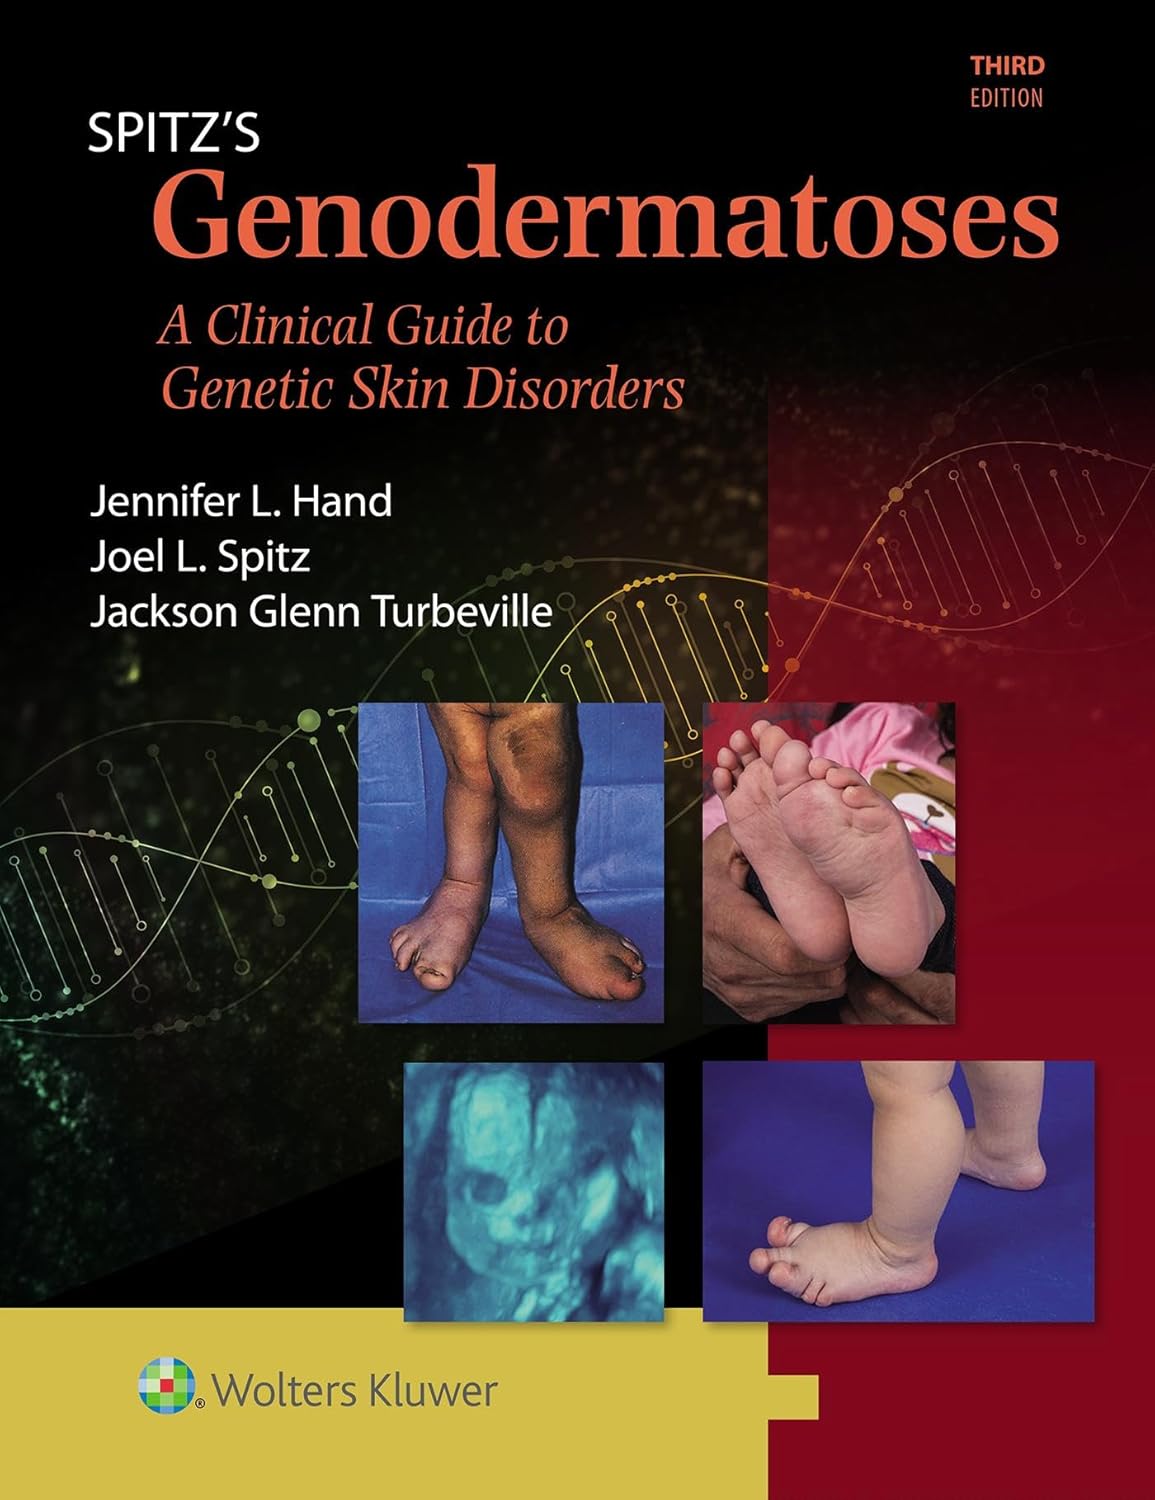 (EBook PDF)Spitz s Genodermatoses: A Full Color Clinical Guide to Genetic Skin Disorders, 3rd edition by Joel L. Spitz MD, Jennifer Lynn Hand MD, Jackson Glenn Turbeville